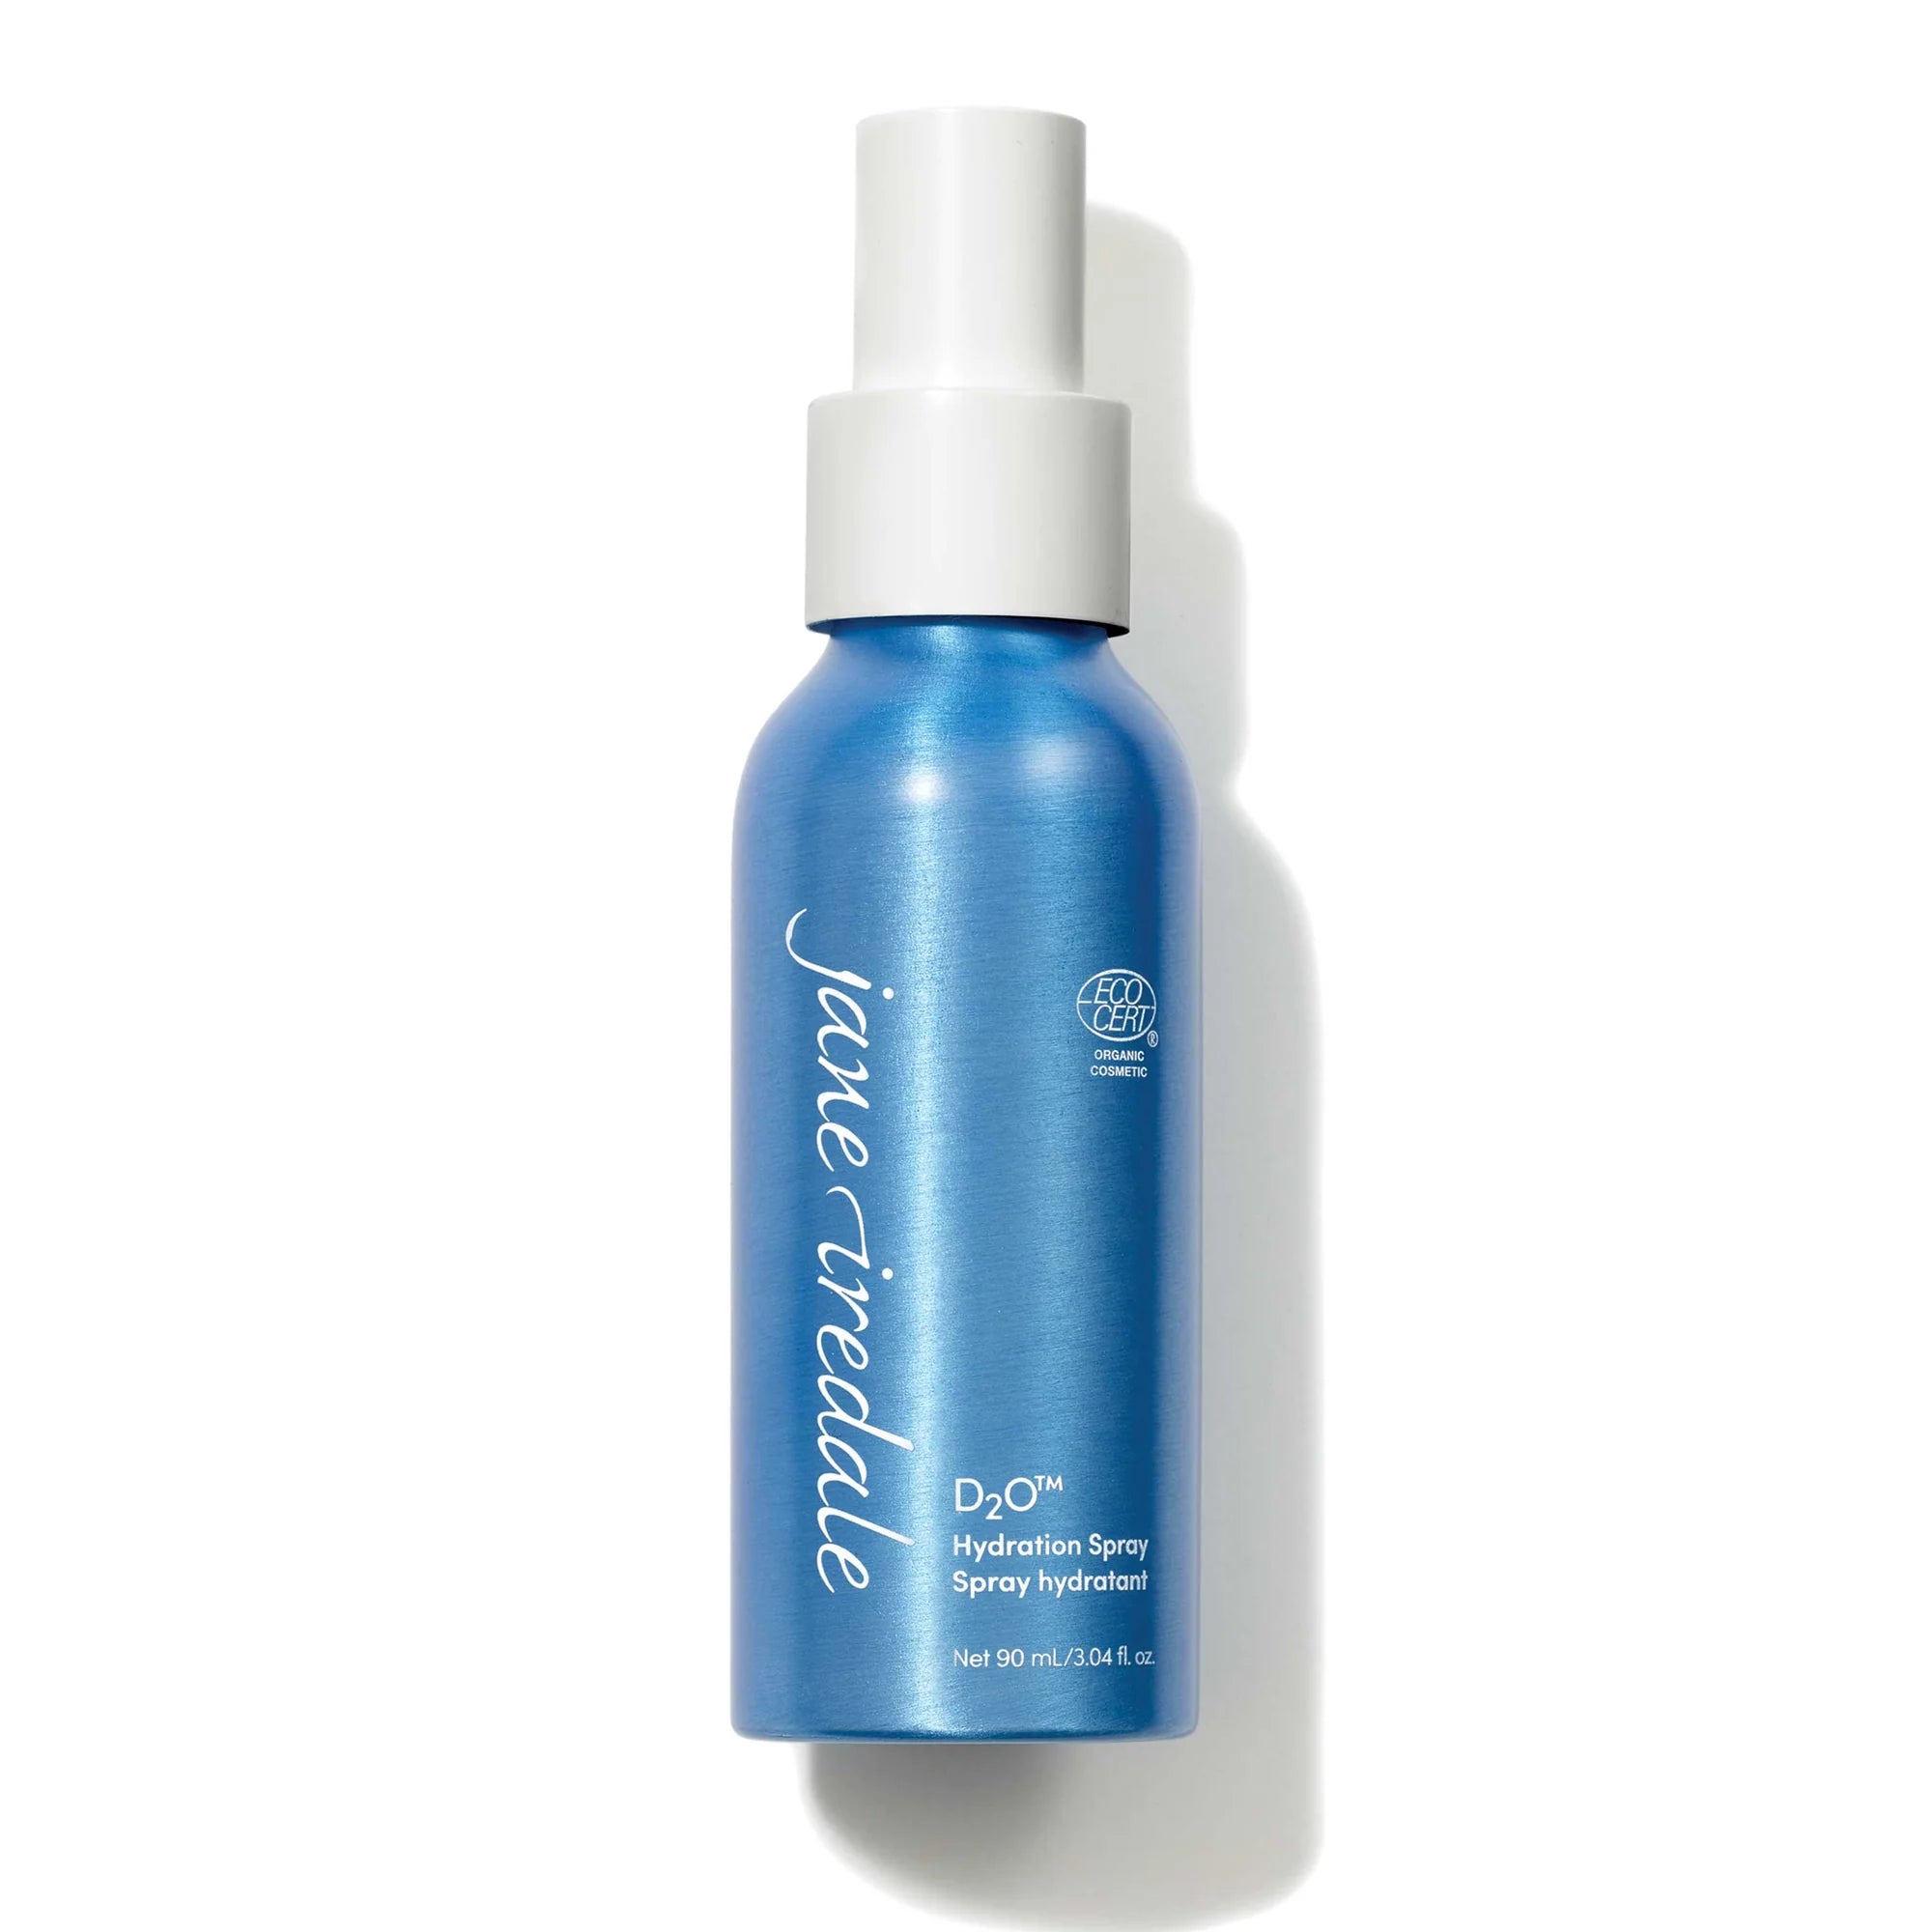 Jane Iredale's D2O™ Hydration Spray 90 ml - Use to set mineral makeup foundation for a long-lasting, smooth finish